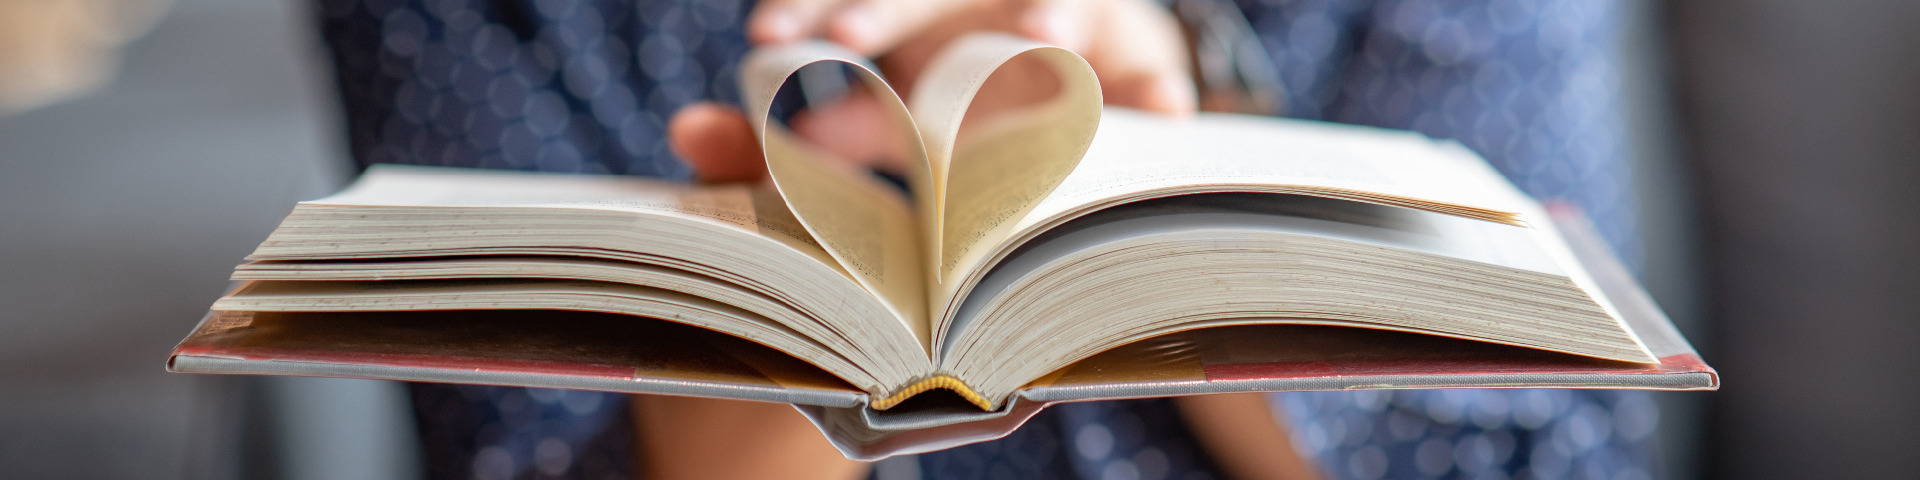 Open book with middle pages curled into a heart shape